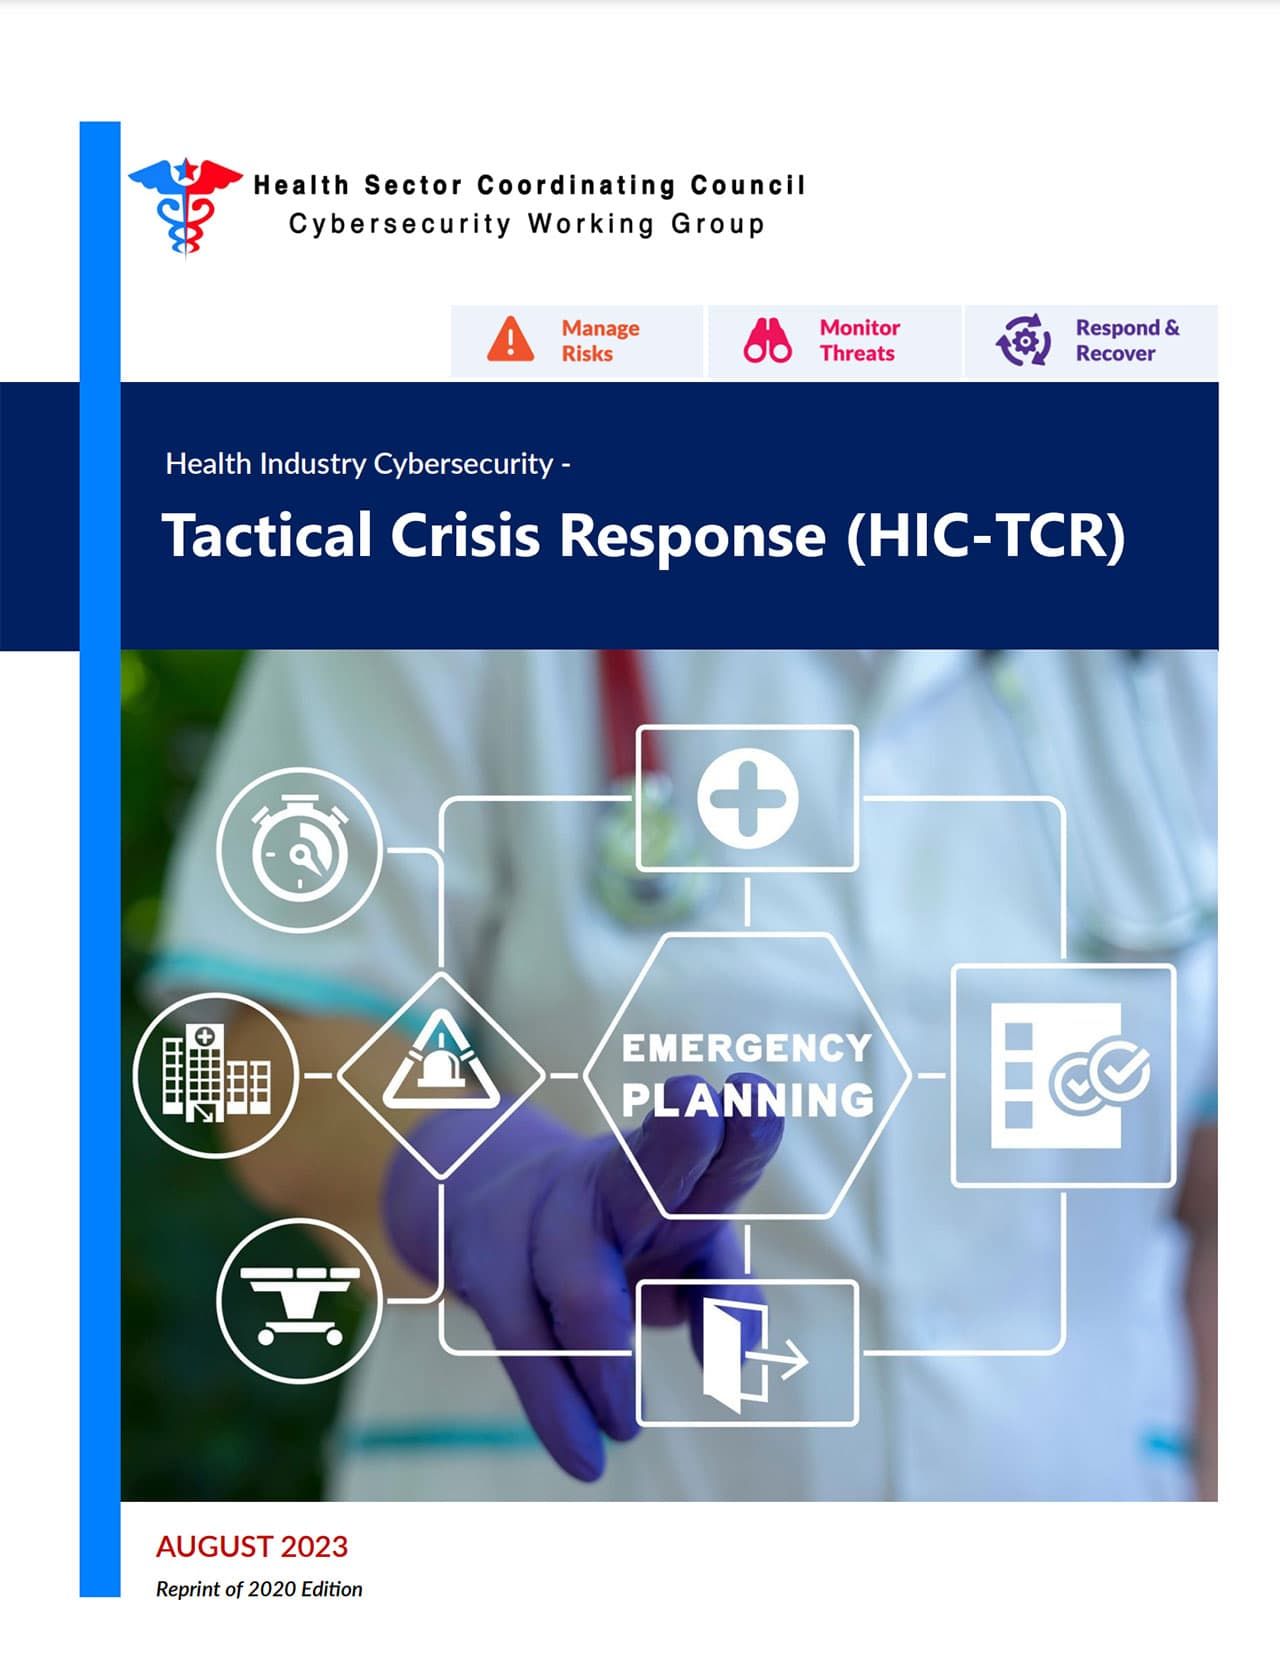 Health Industry Cybersecurity Tactical Crisis Response Guide (HIC-TCR)